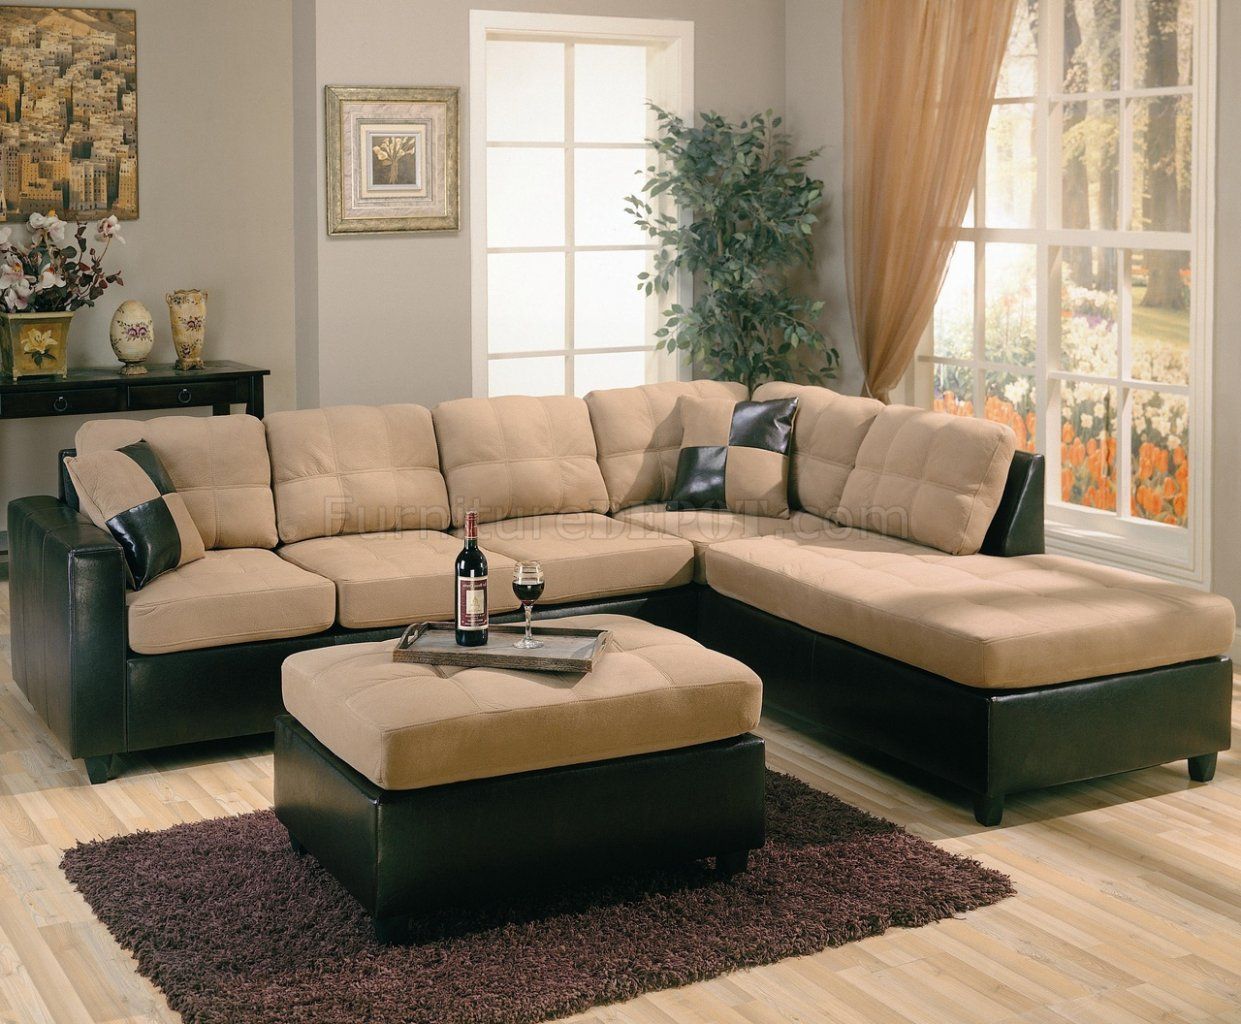 Two Tone Tan Microfiber & Dark Brown Faux Leather Sectional Sofa Intended For 2 Tone Chocolate Microfiber Sofas (Gallery 11 of 20)